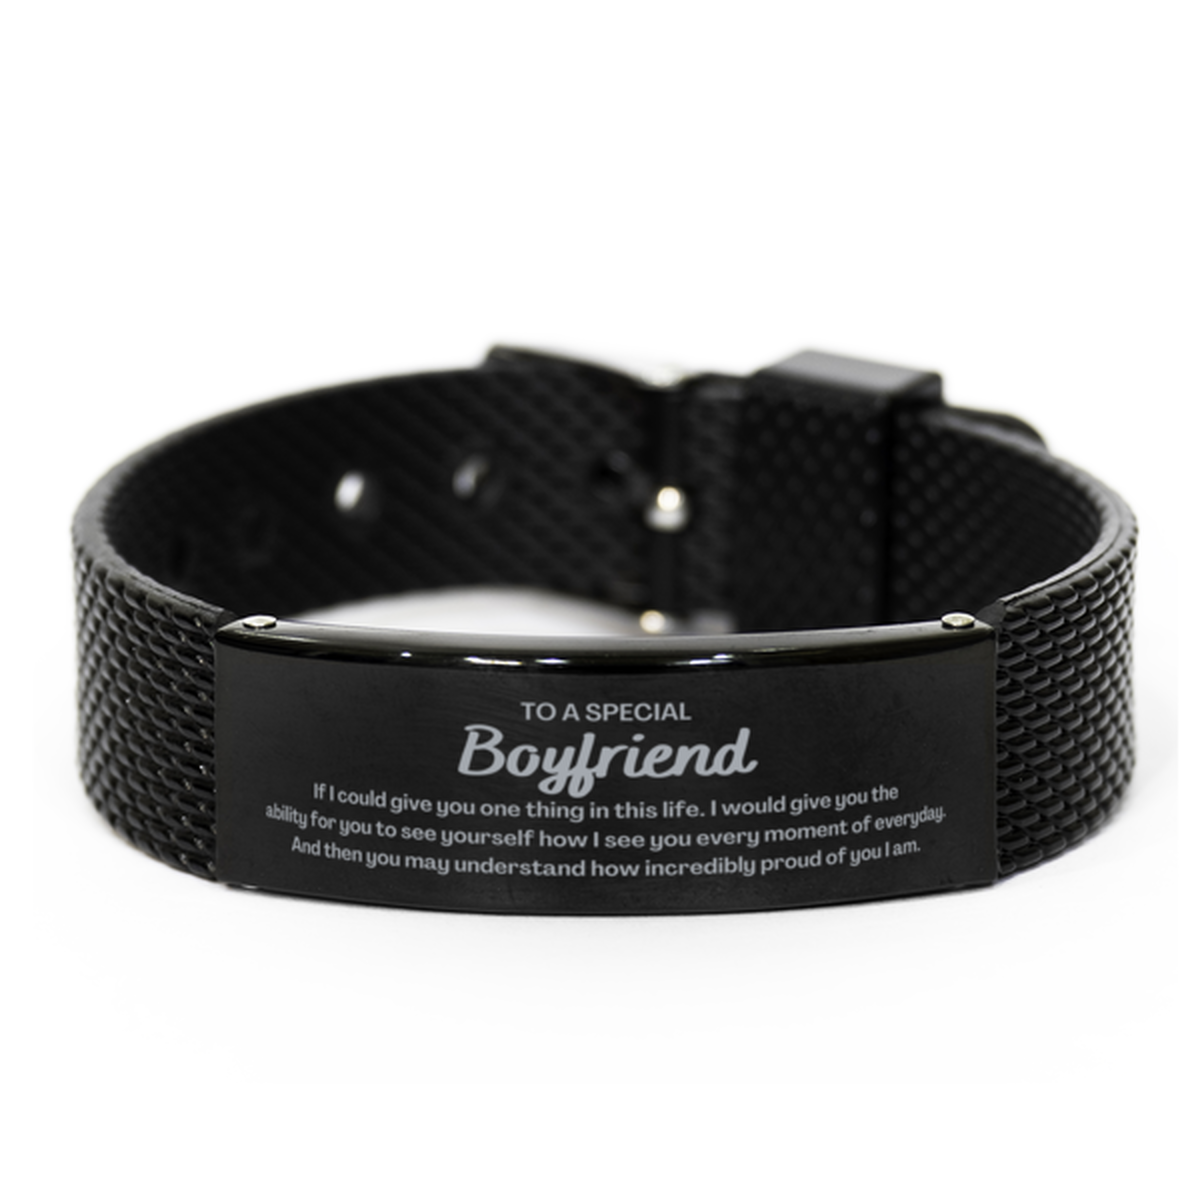 To My Boyfriend Black Shark Mesh Bracelet, Gifts For Boyfriend Engraved, Inspirational Gifts for Christmas Birthday, Epic Gifts for Boyfriend To A Special Boyfriend how incredibly proud of you I am